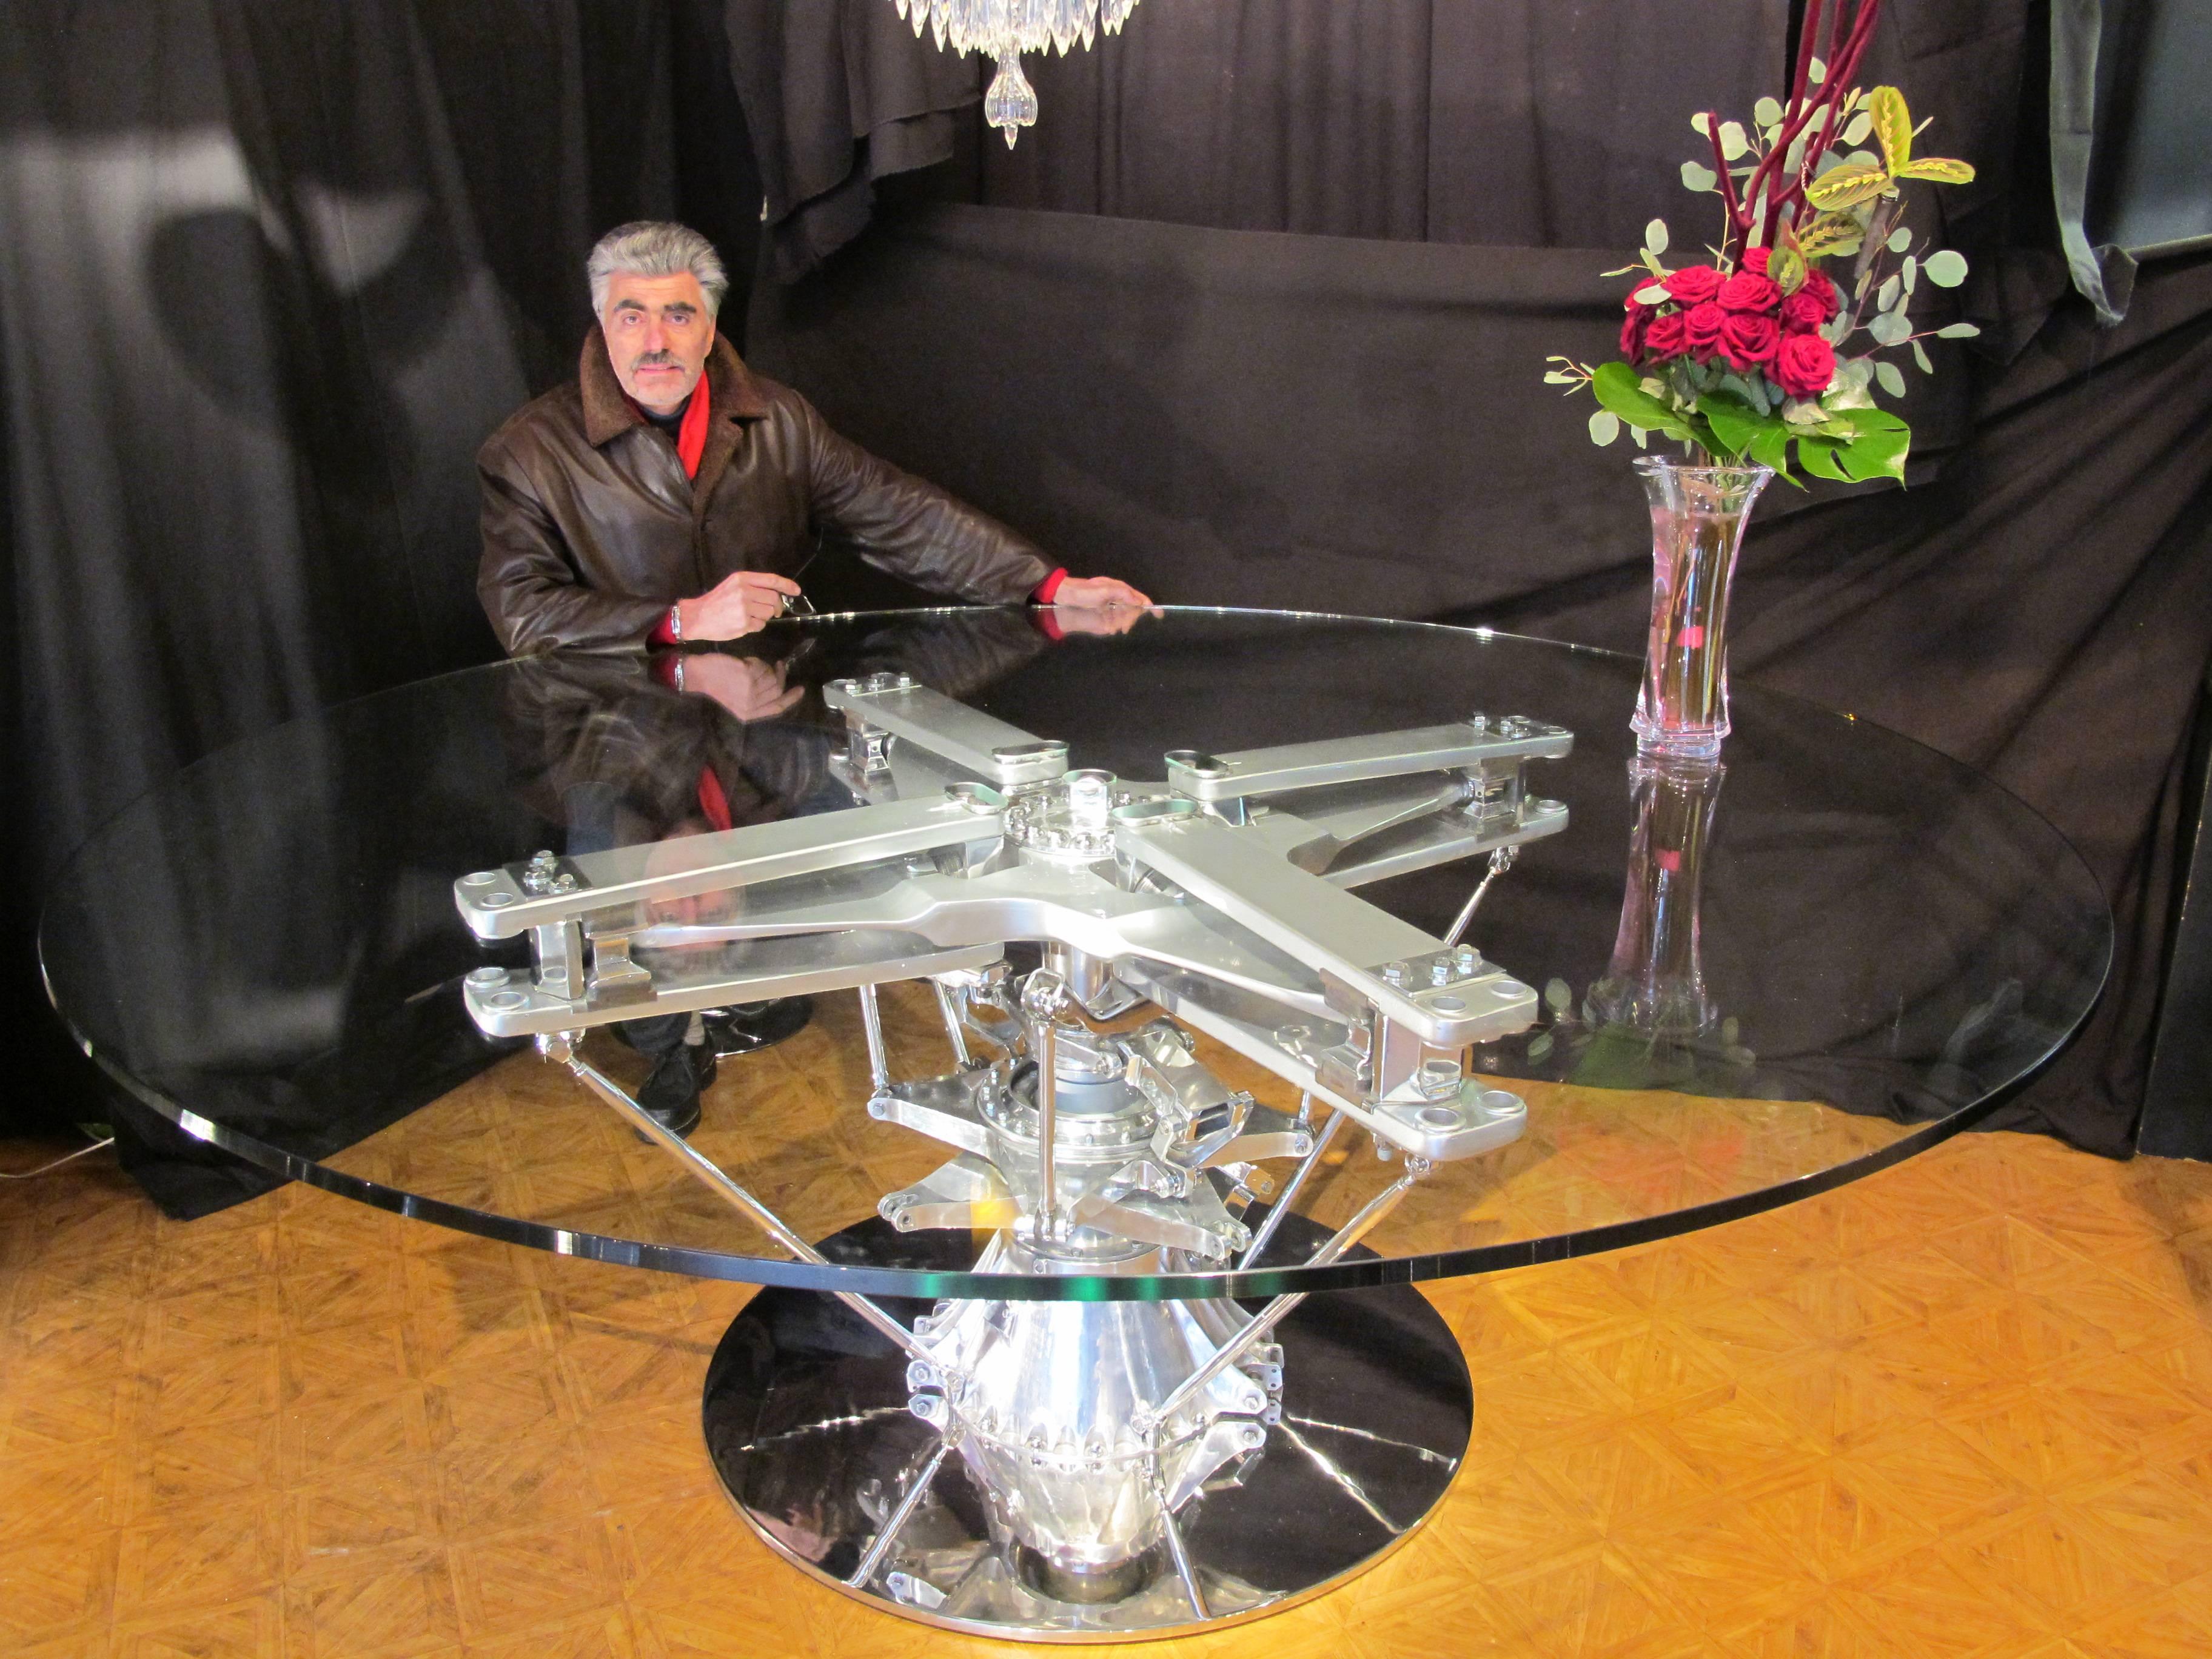 AVIATIONSPIRIT by Jean-Pierre CARPENTIER
Aviation furniture Extremely large table with Dolphin Helicopter rotor by Jean-Pierre Carpentier. Aircraft Table, Aeronautical Furniture, Mobilier Aeronautique.
Creation design with a Dolphin Helicopter